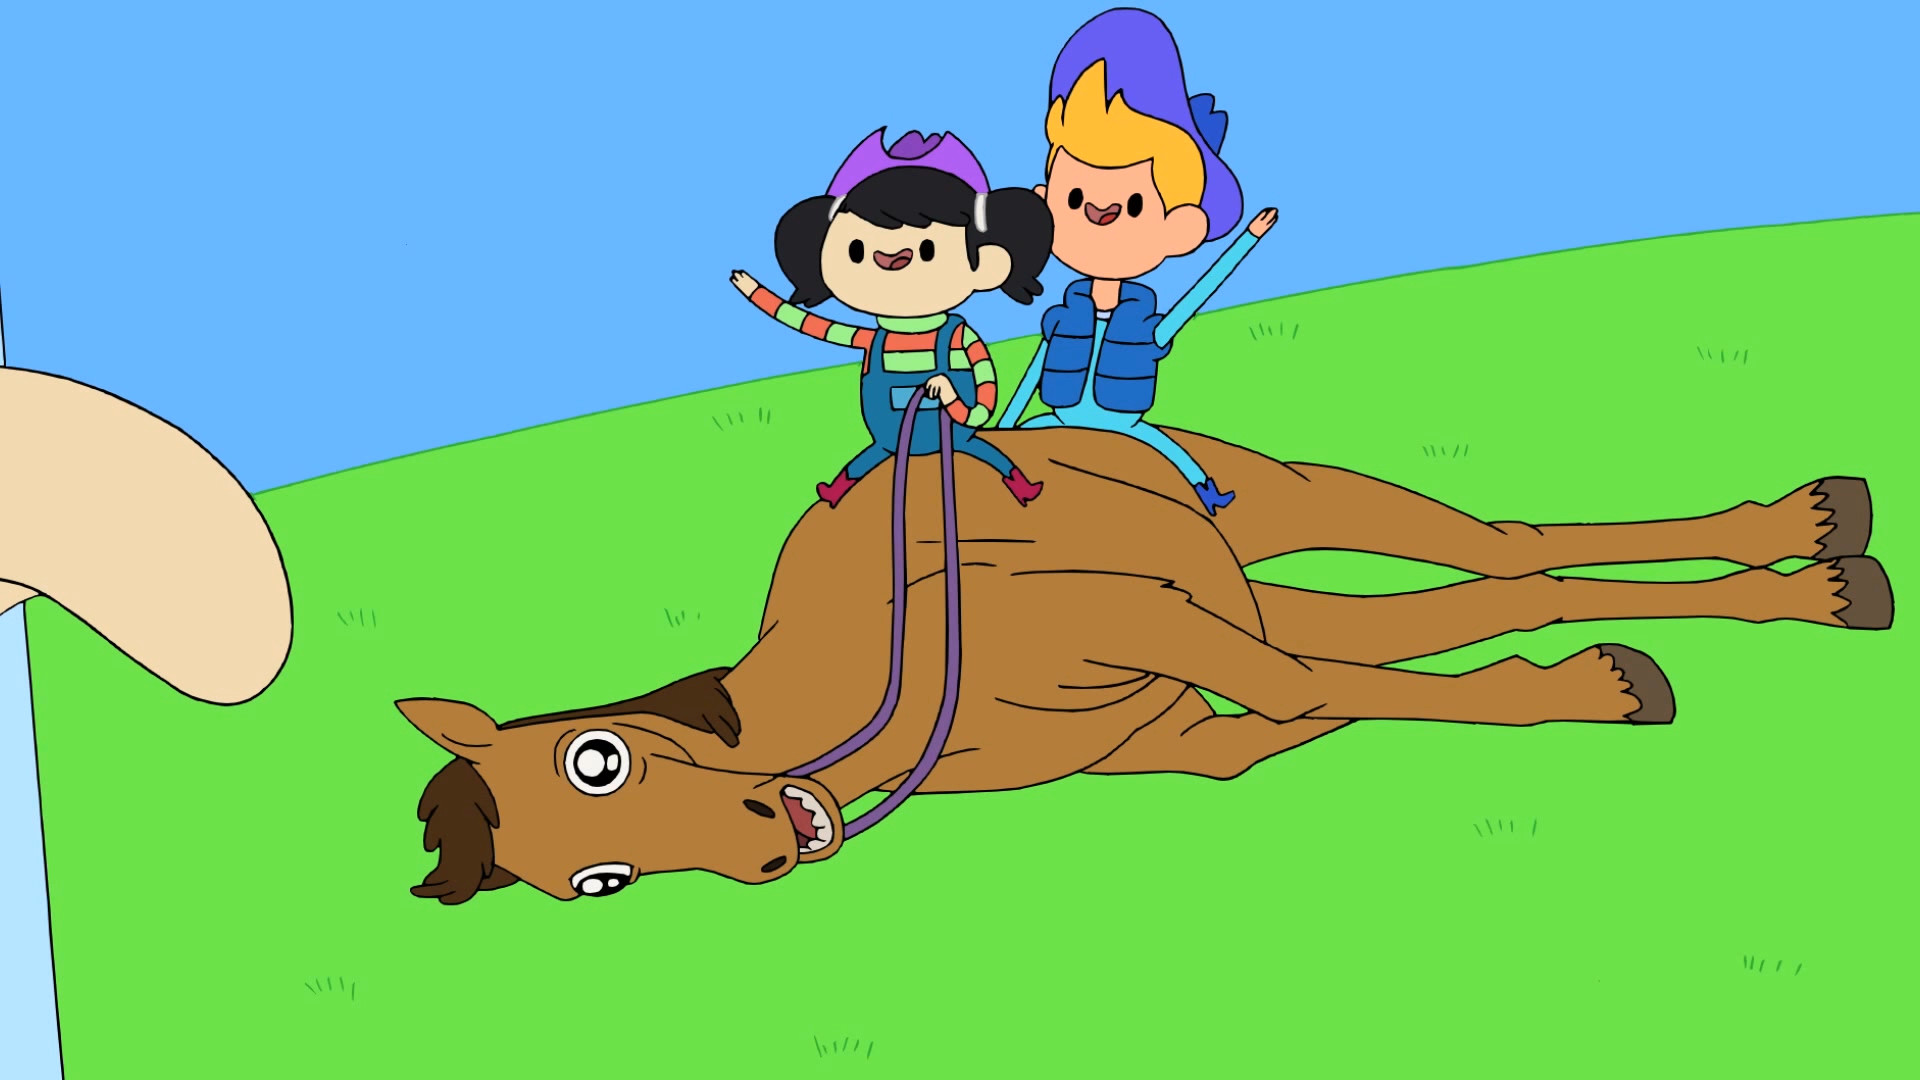 1920x1080 From "Catbug," Bravest Warriors episode 11, Chris and Beth ride a  knowledgeable horse that has fathomed the meaning/ size of the universe and  is th…